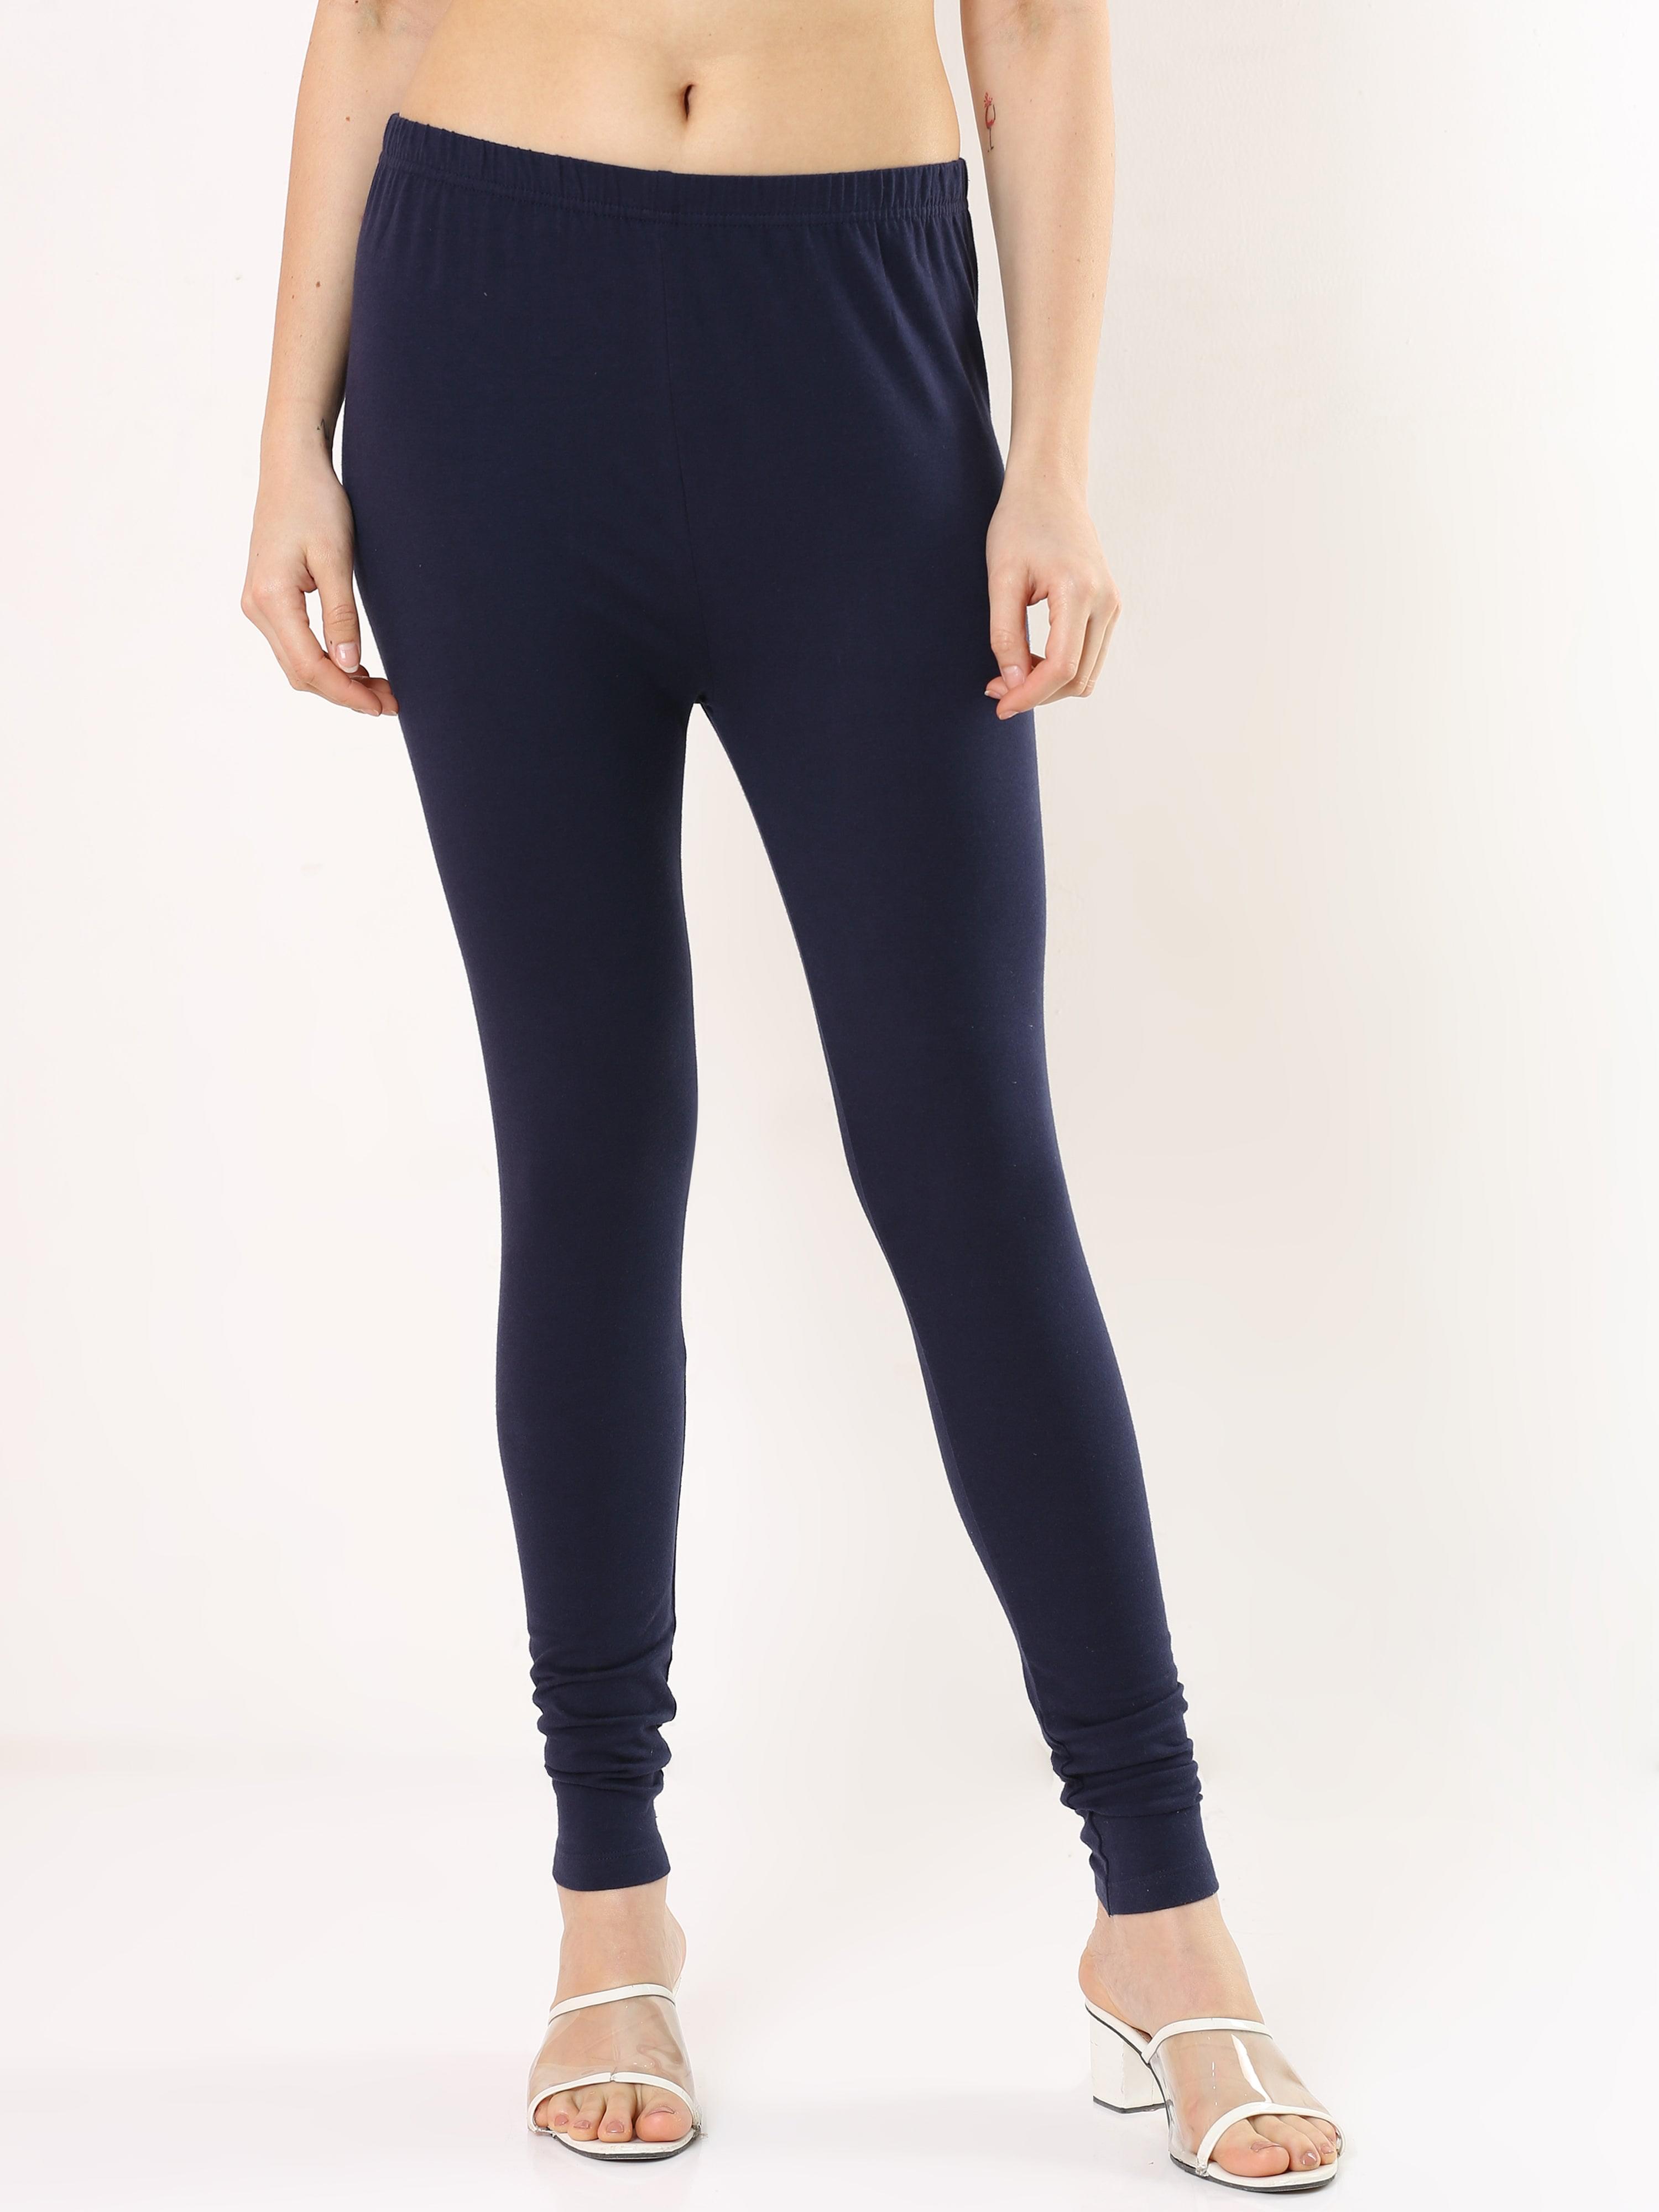 Navy Leggings South Africa, High-waisted | Shop on Equilibrio